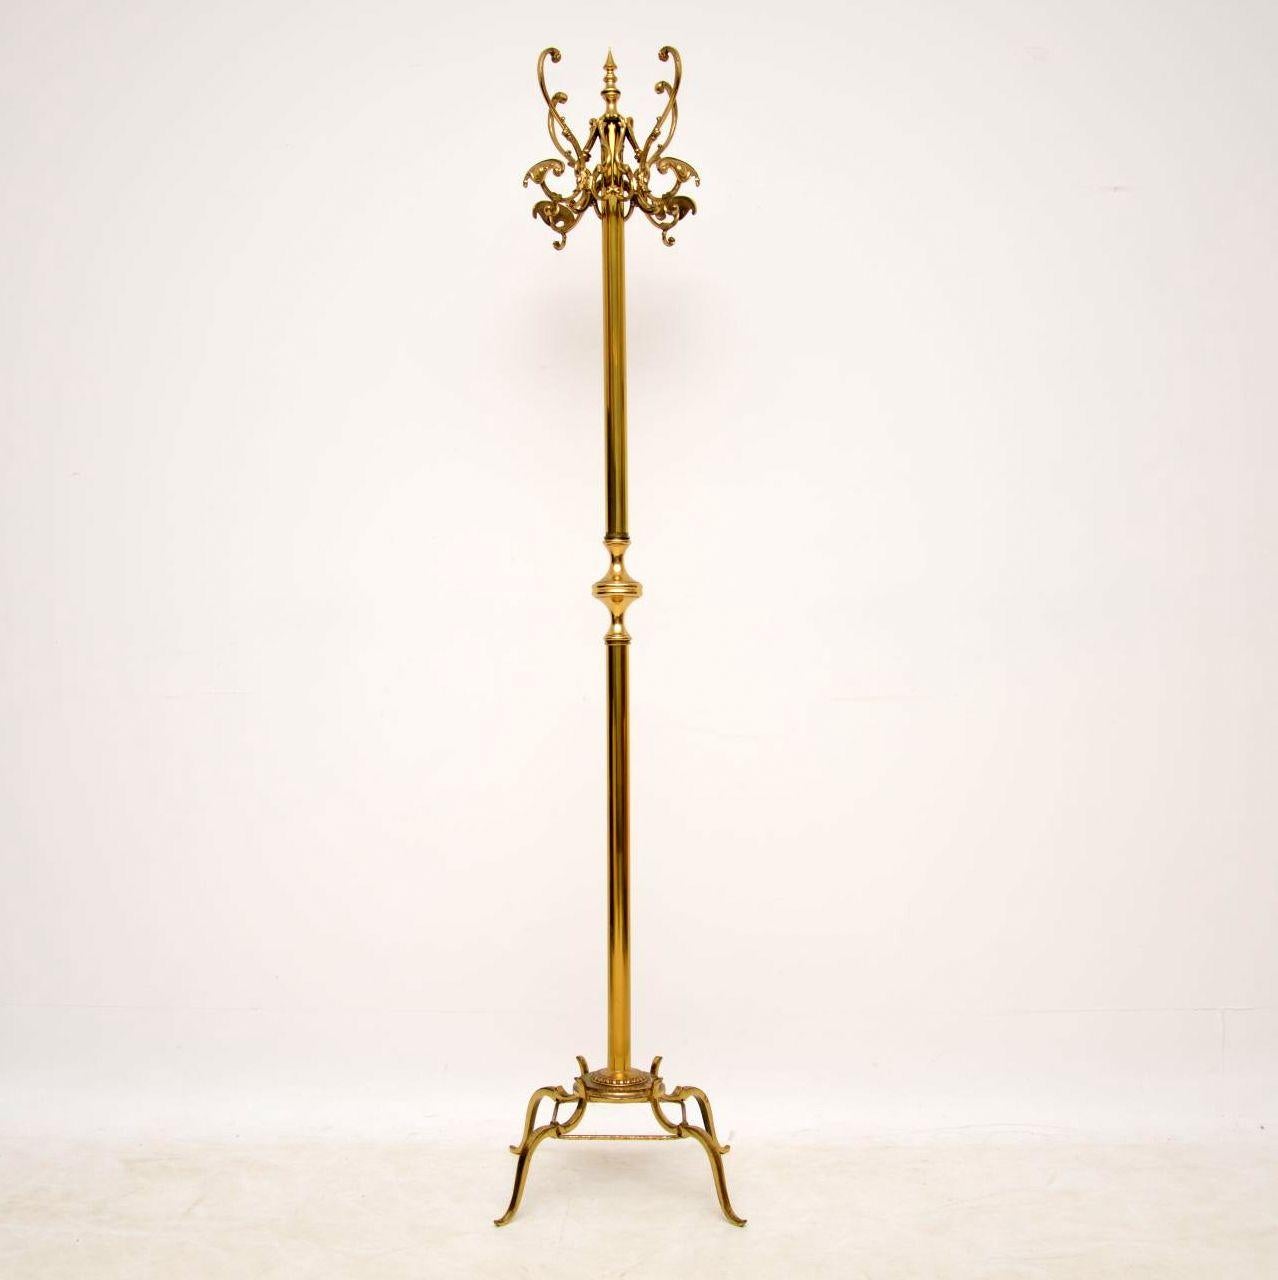 A stunning and very well made hatstand or coat rack in brass, this was made in Italy, it dates from around the 1950s-1960s. The quality is excellent, and the condition is great for its age, there is just some minor surface wear and tarnish here and